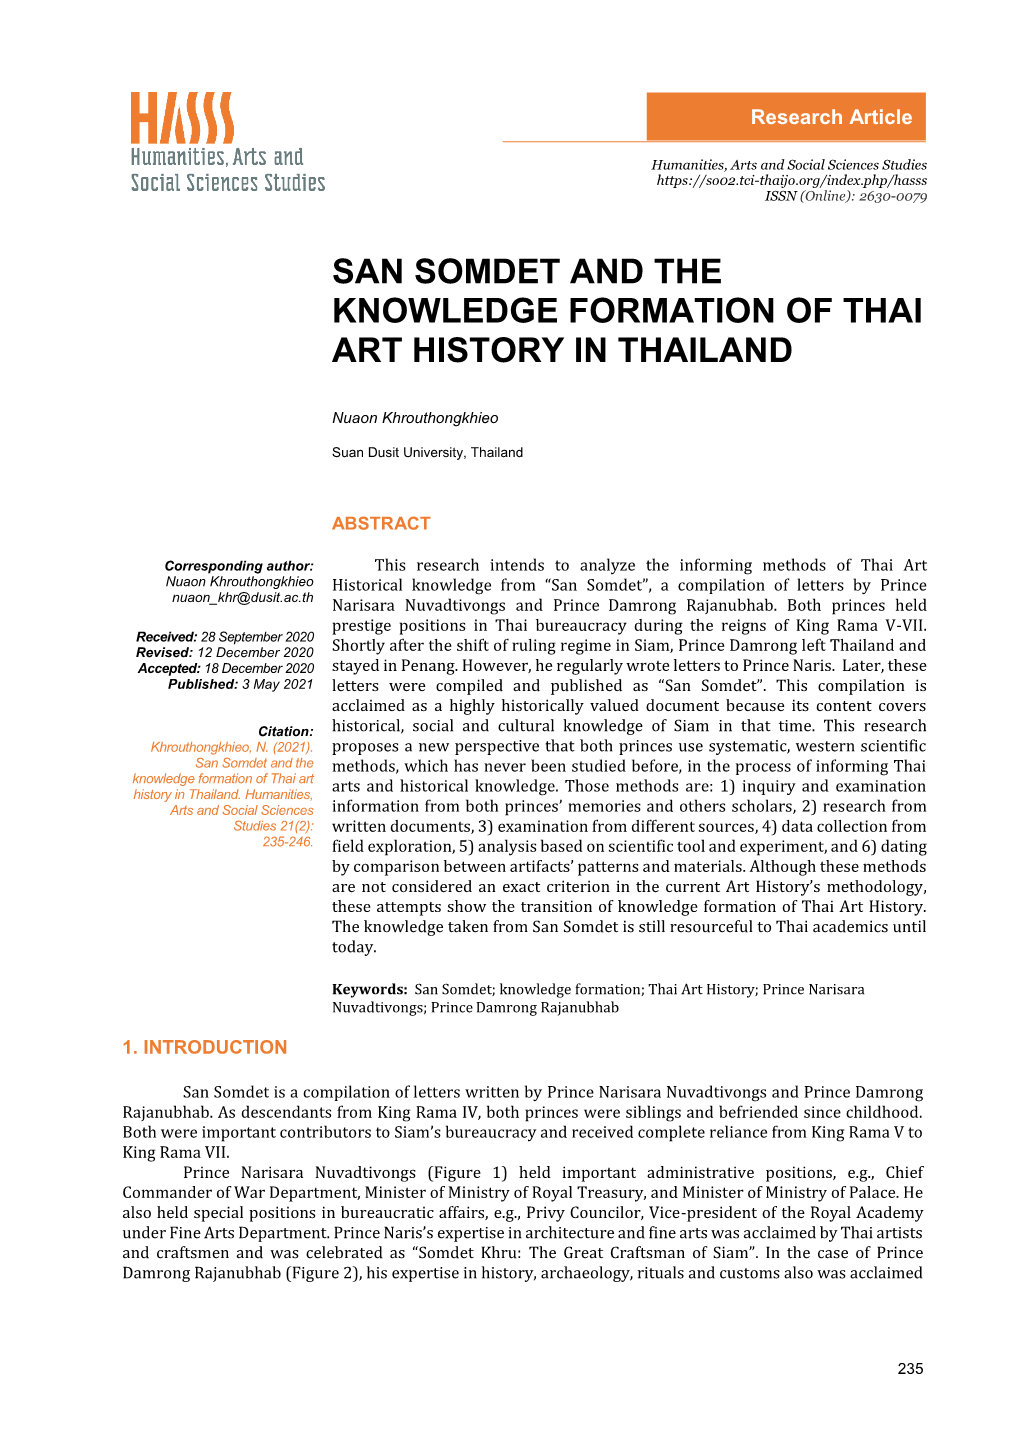 San Somdet and the Knowledge Formation of Thai Art History in Thailand